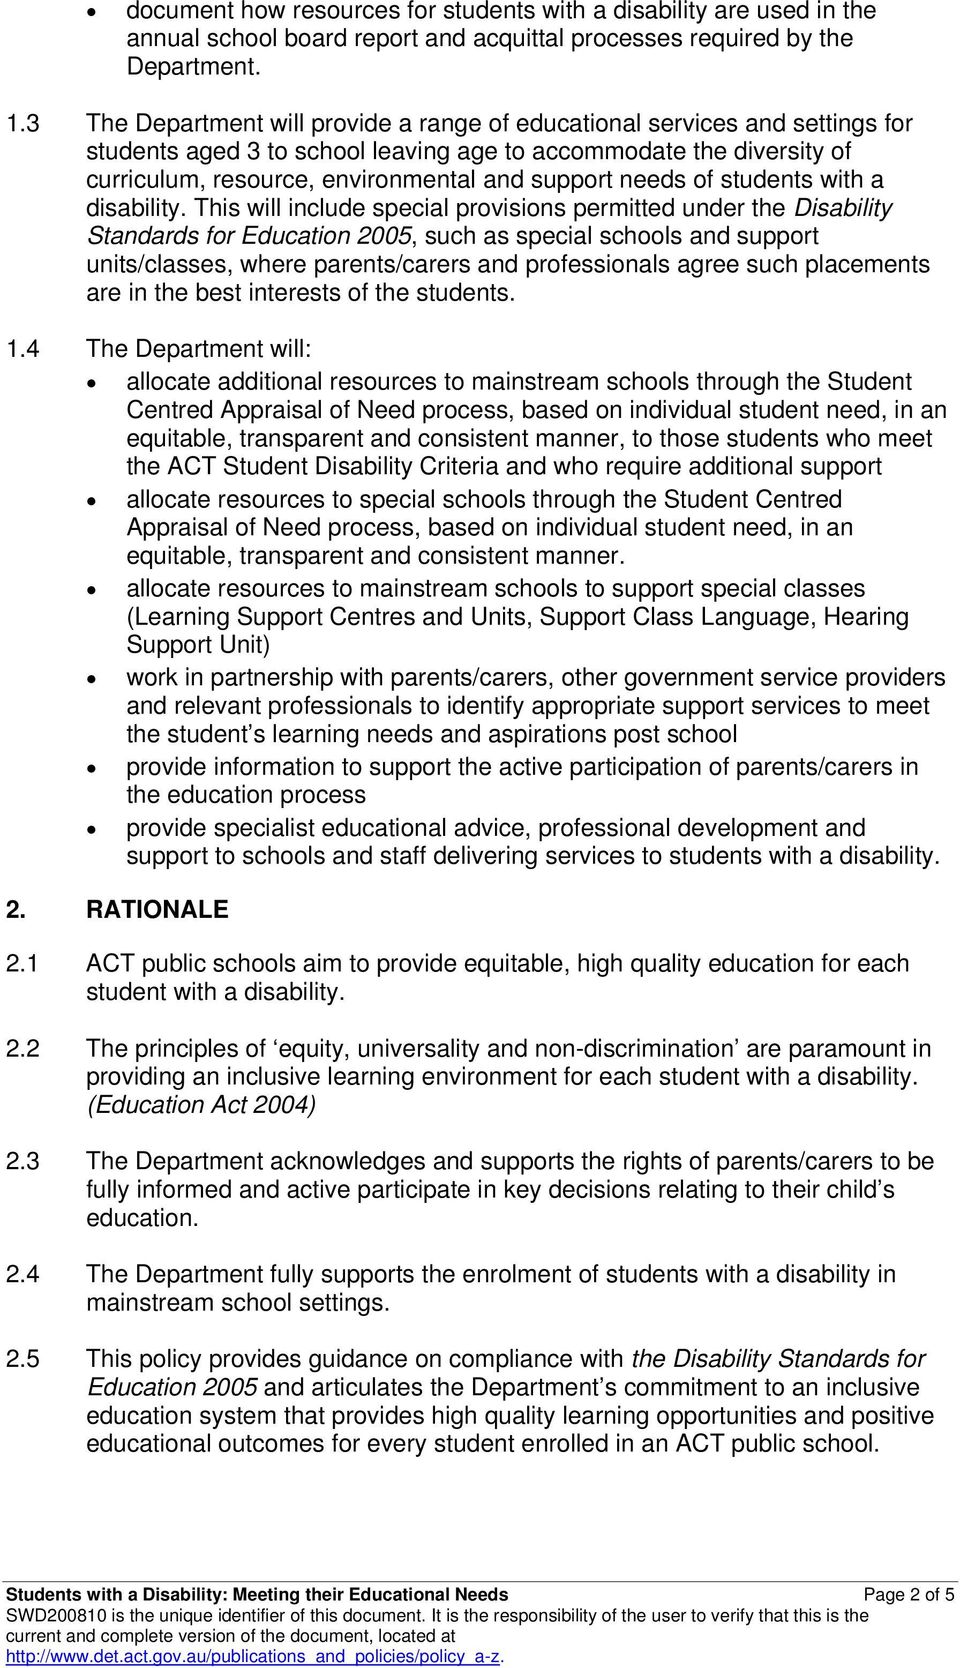 needs of students with a disability.